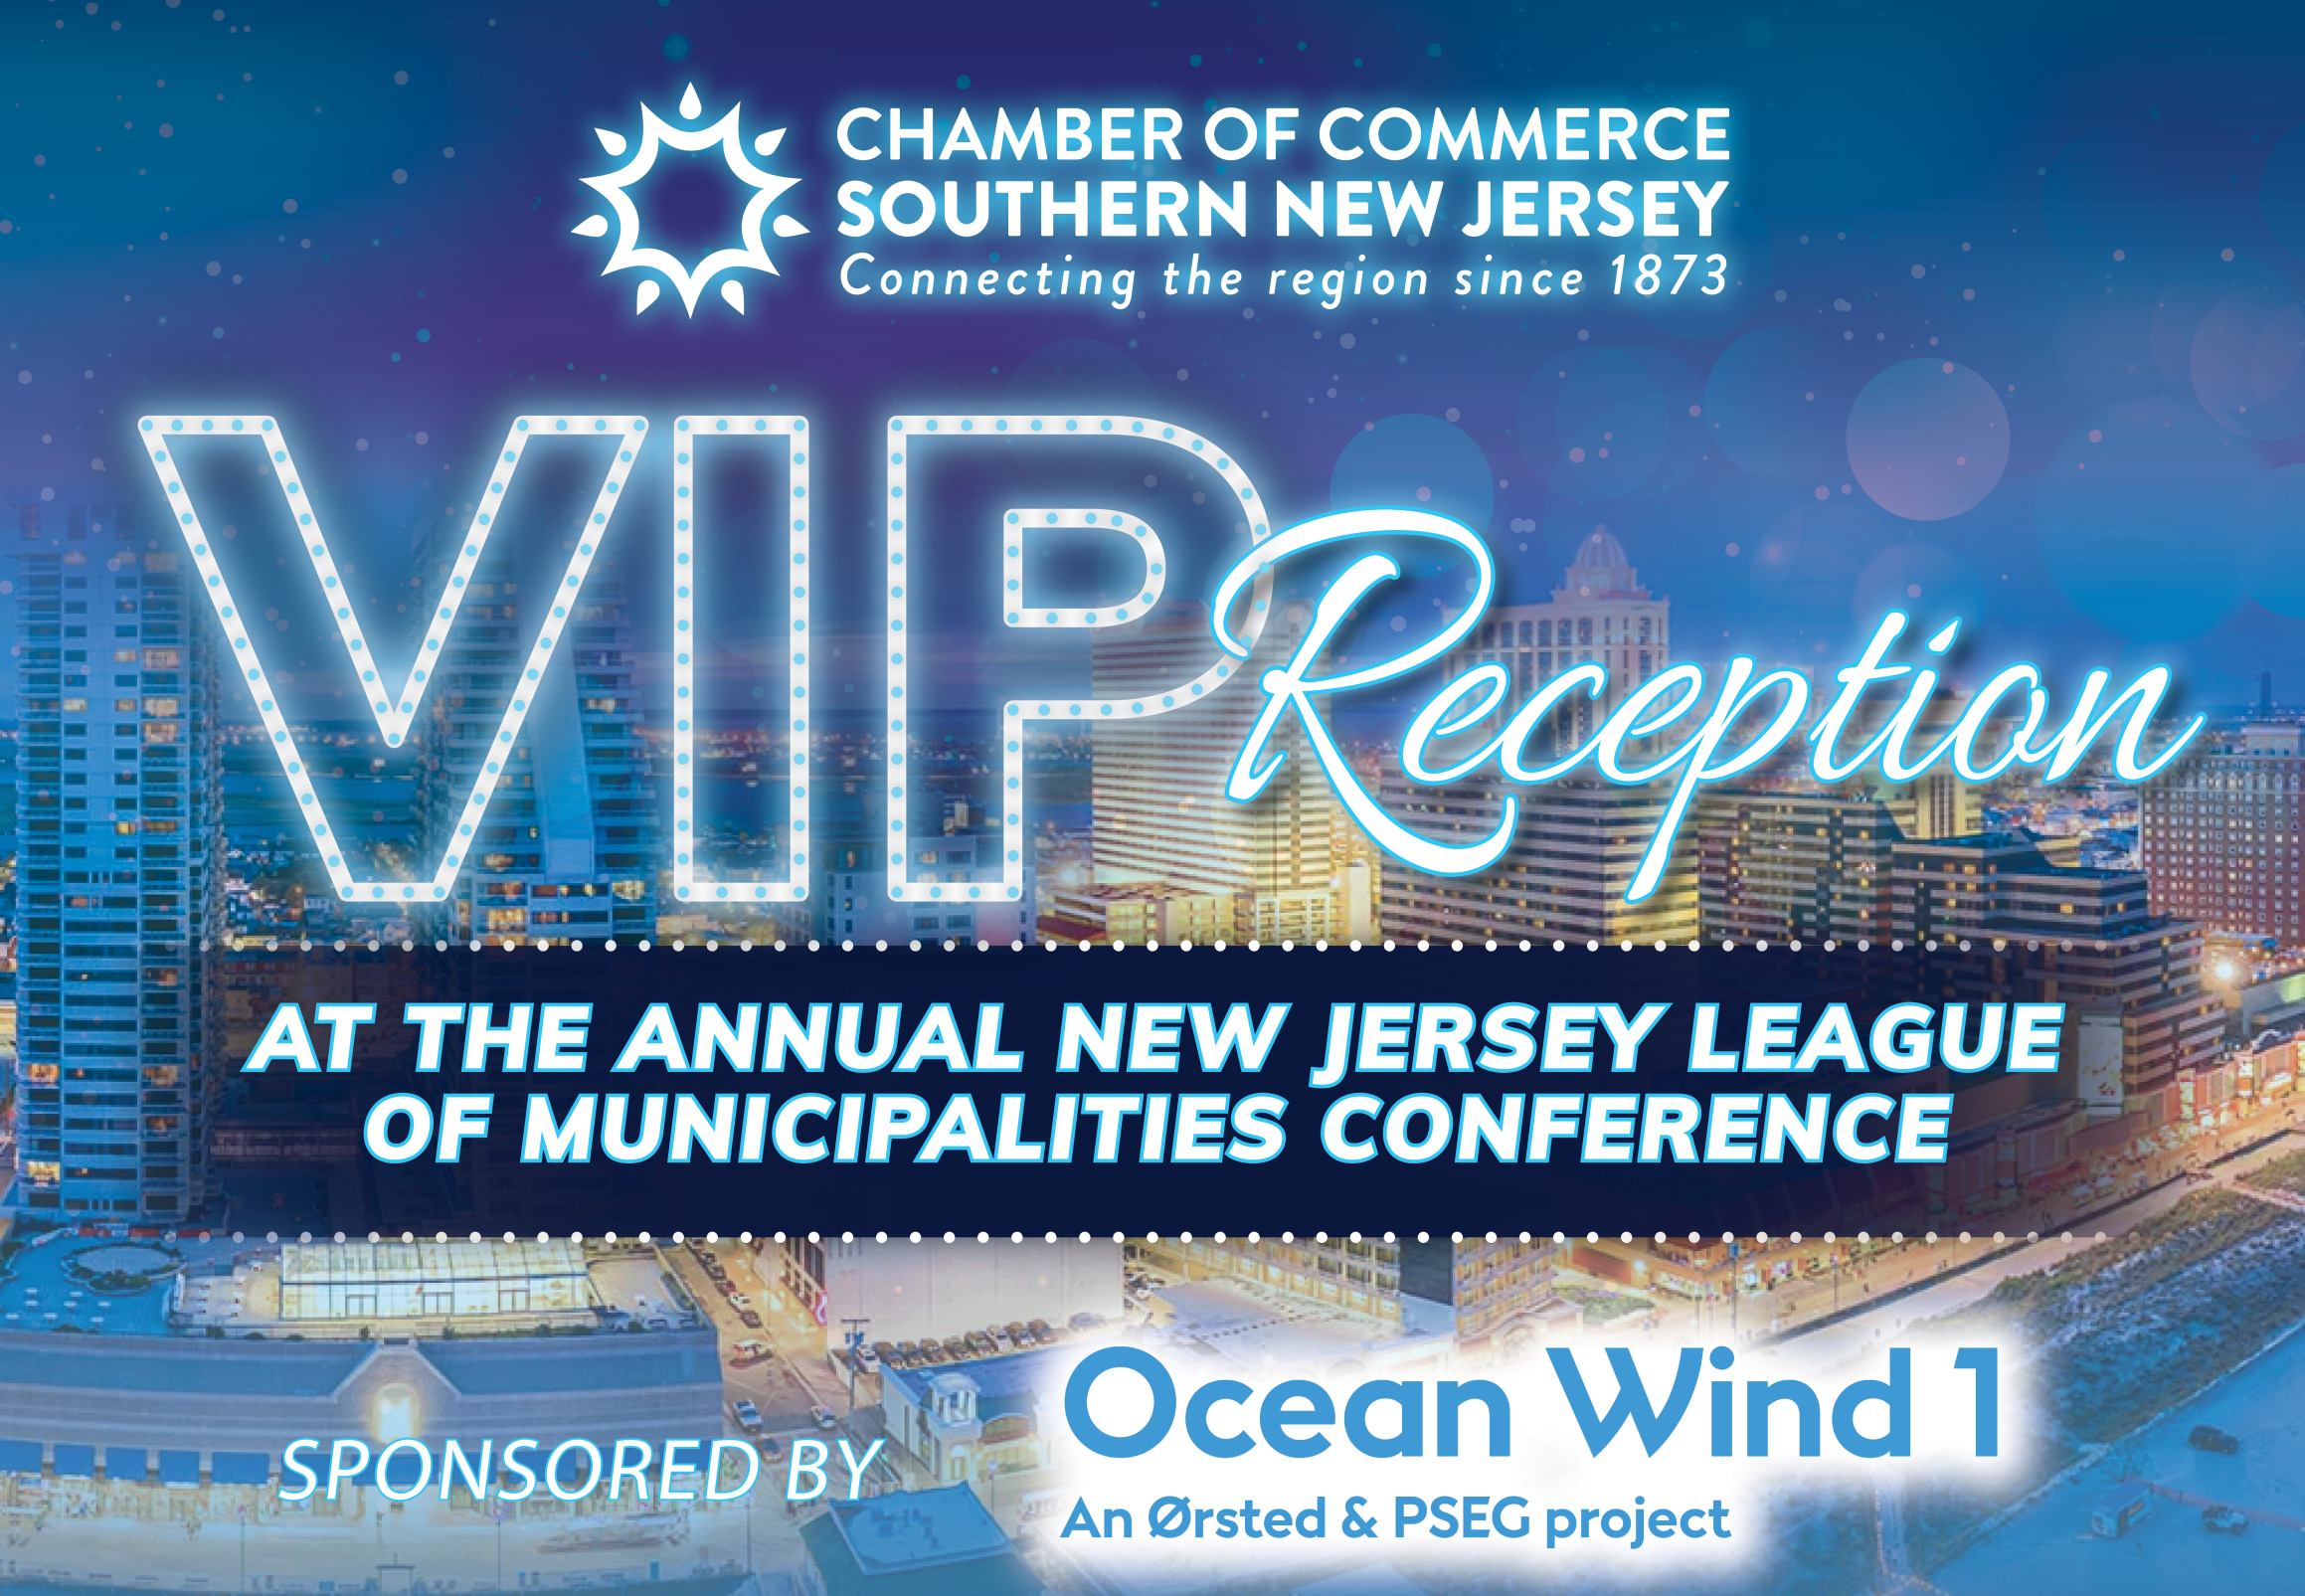 VIP League Reception - Chamber of Commerce Southern New Jersey